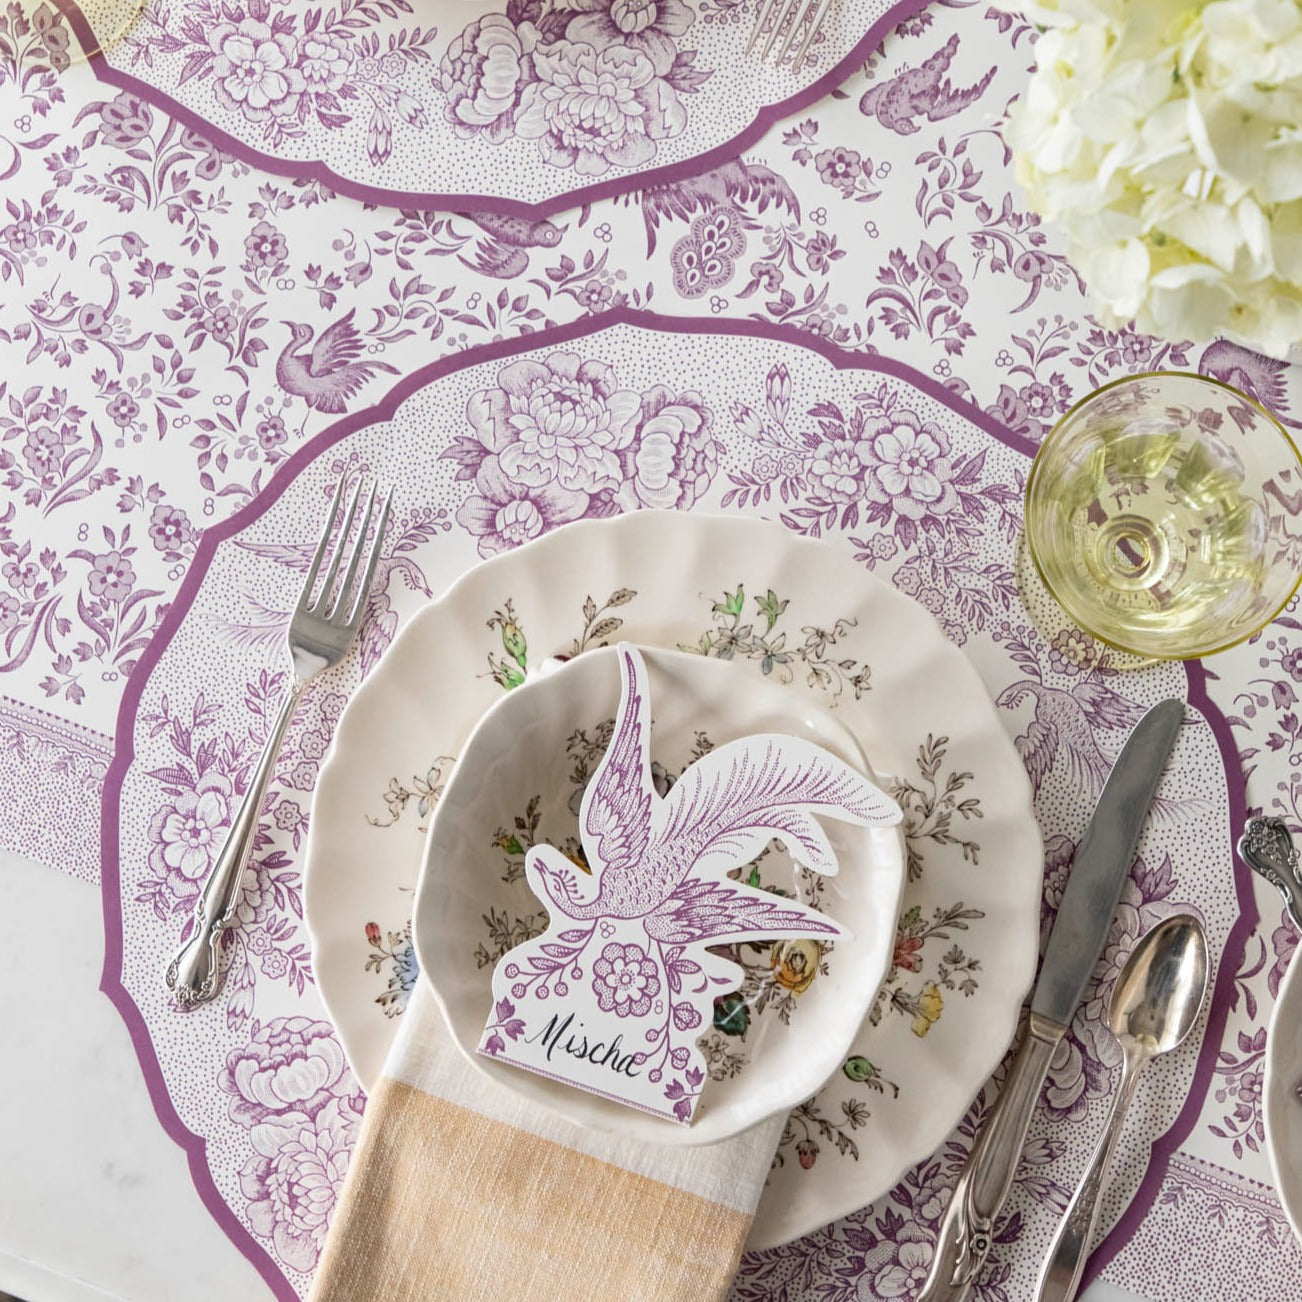 The Die-cut Lilac Asiatic Pheasants Placemat in an elegant table setting, at an angle.